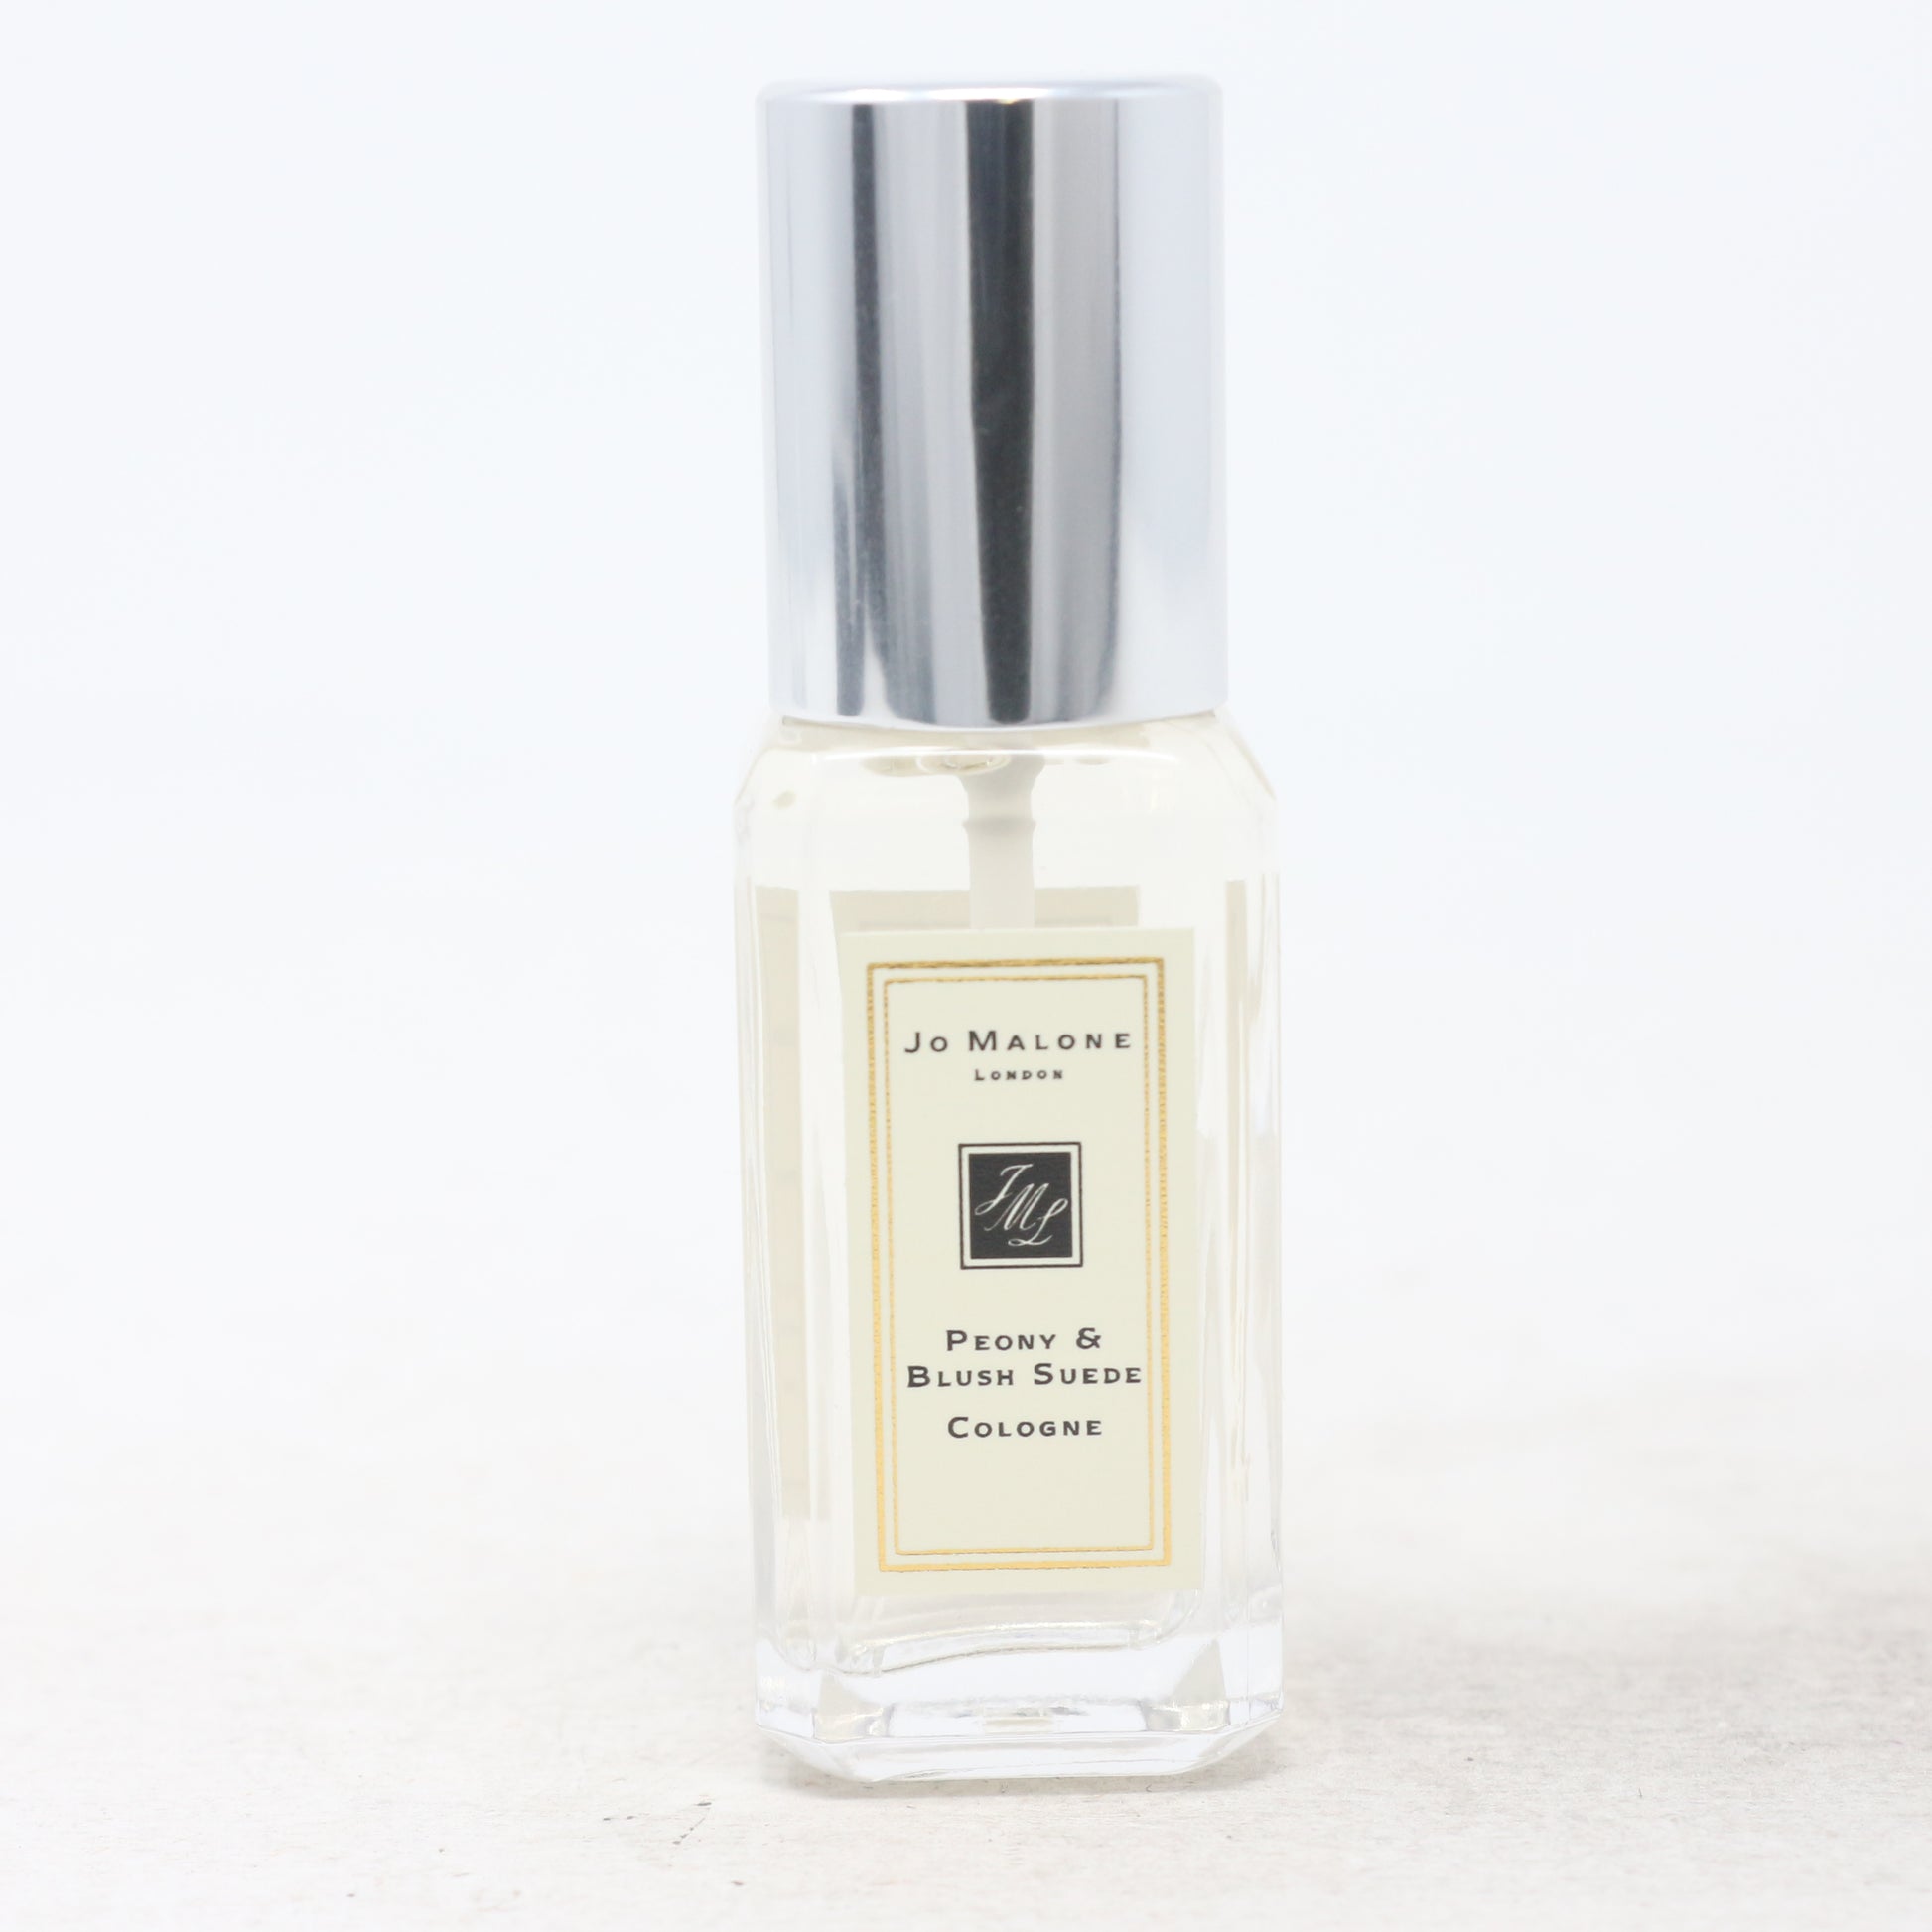 Peony & Blush Suede Cologne 9 ml